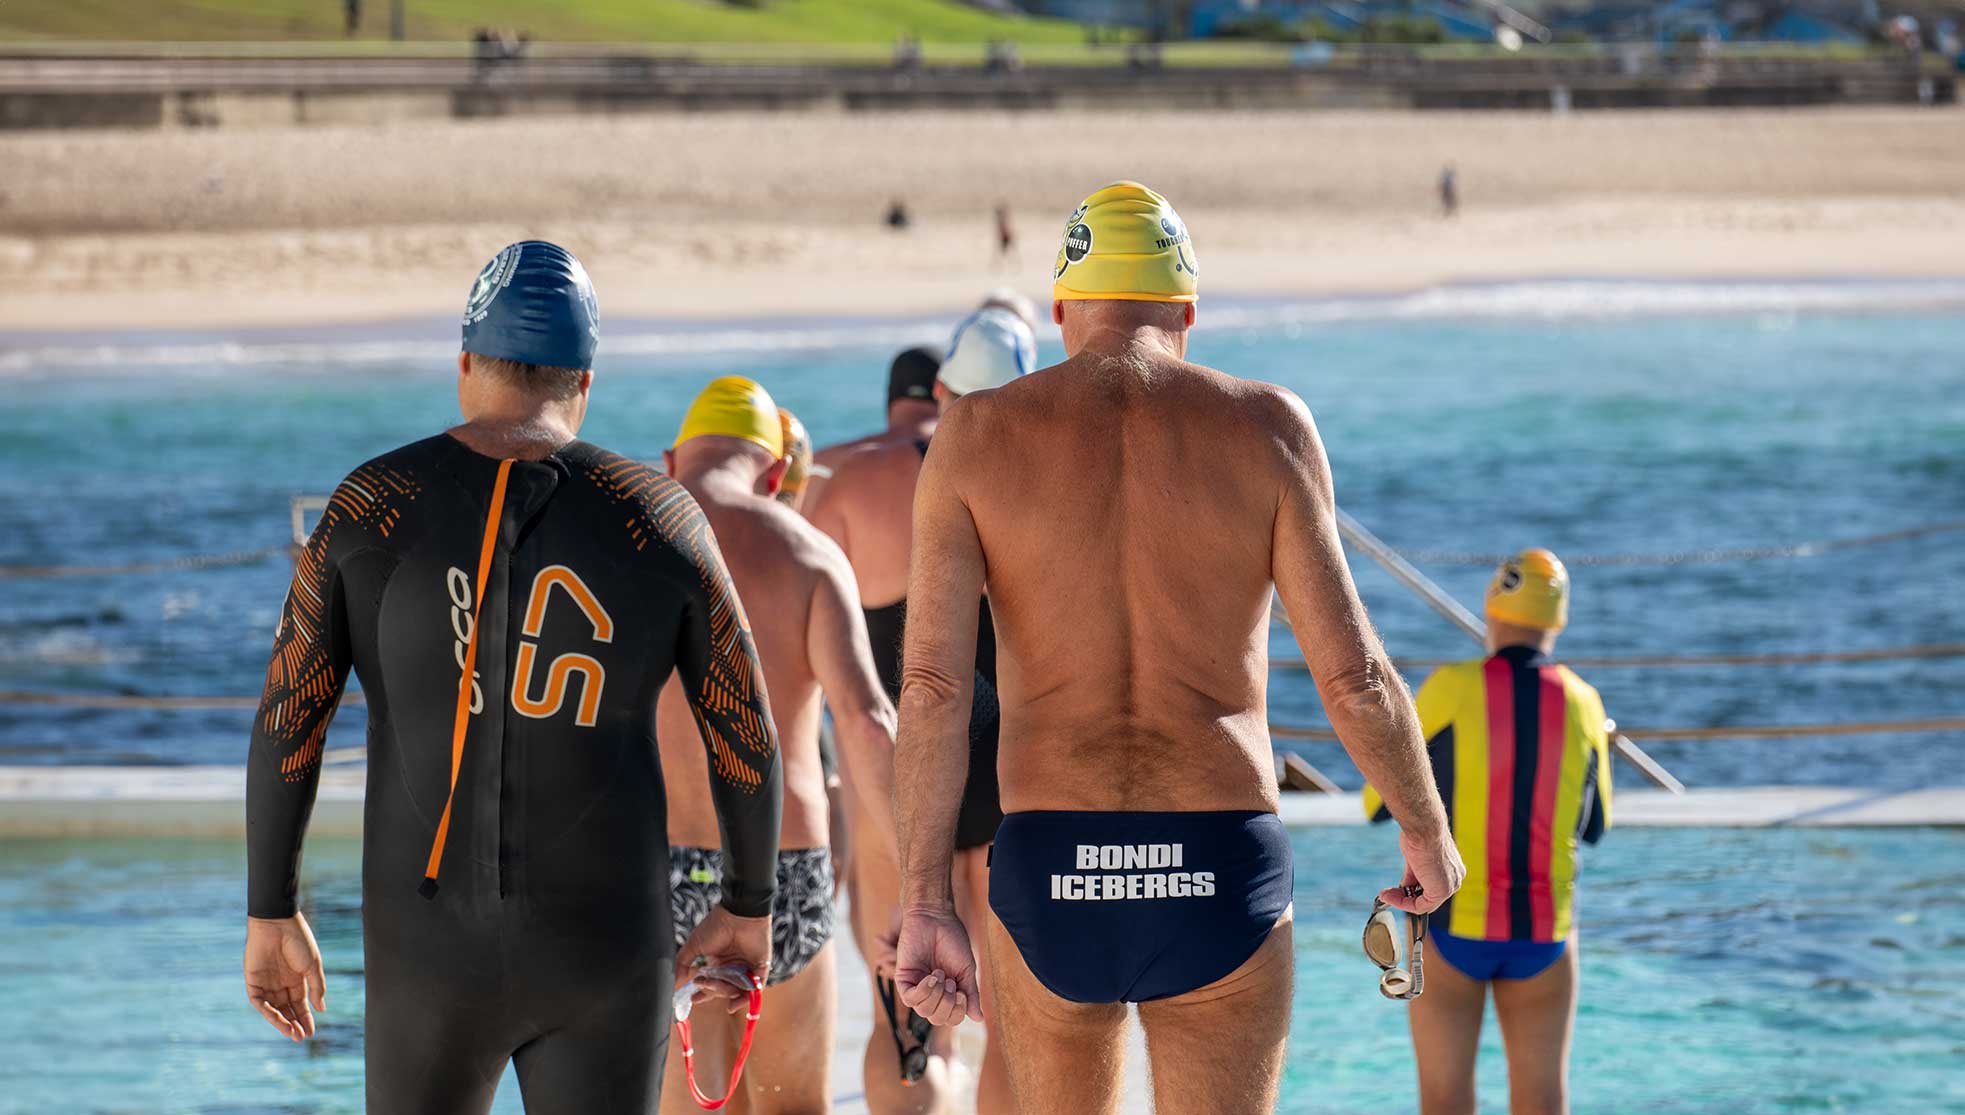 Men in swimming gear heading to the pool